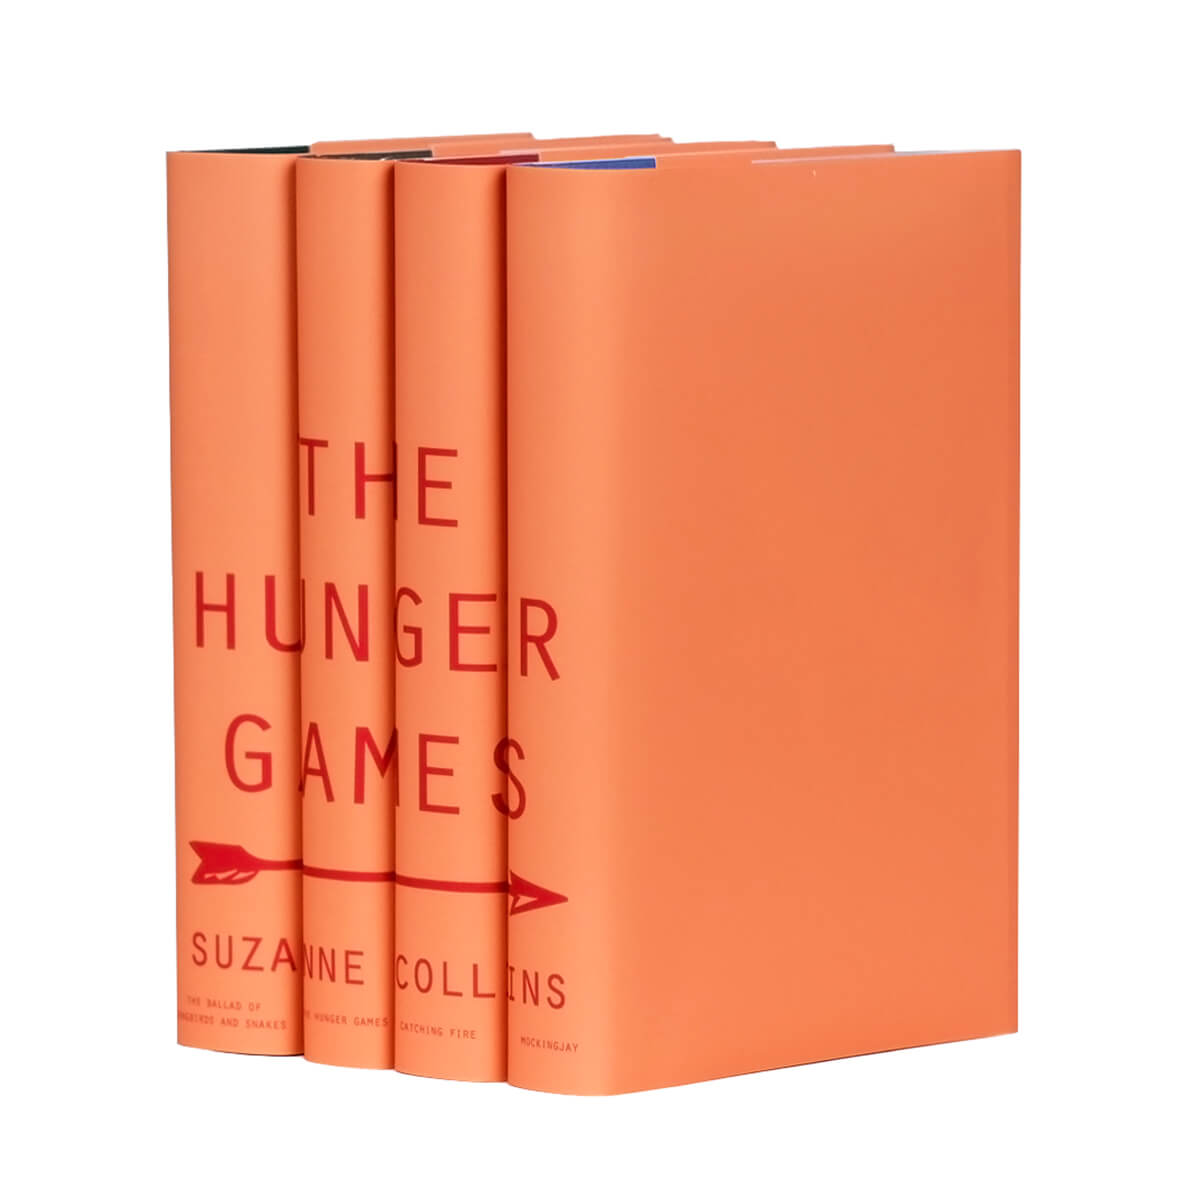 Hunger Games Minimalistic Design, Suzanne Collins Juniper Custom Book Set. This Collection is a great gift for fans of the show!